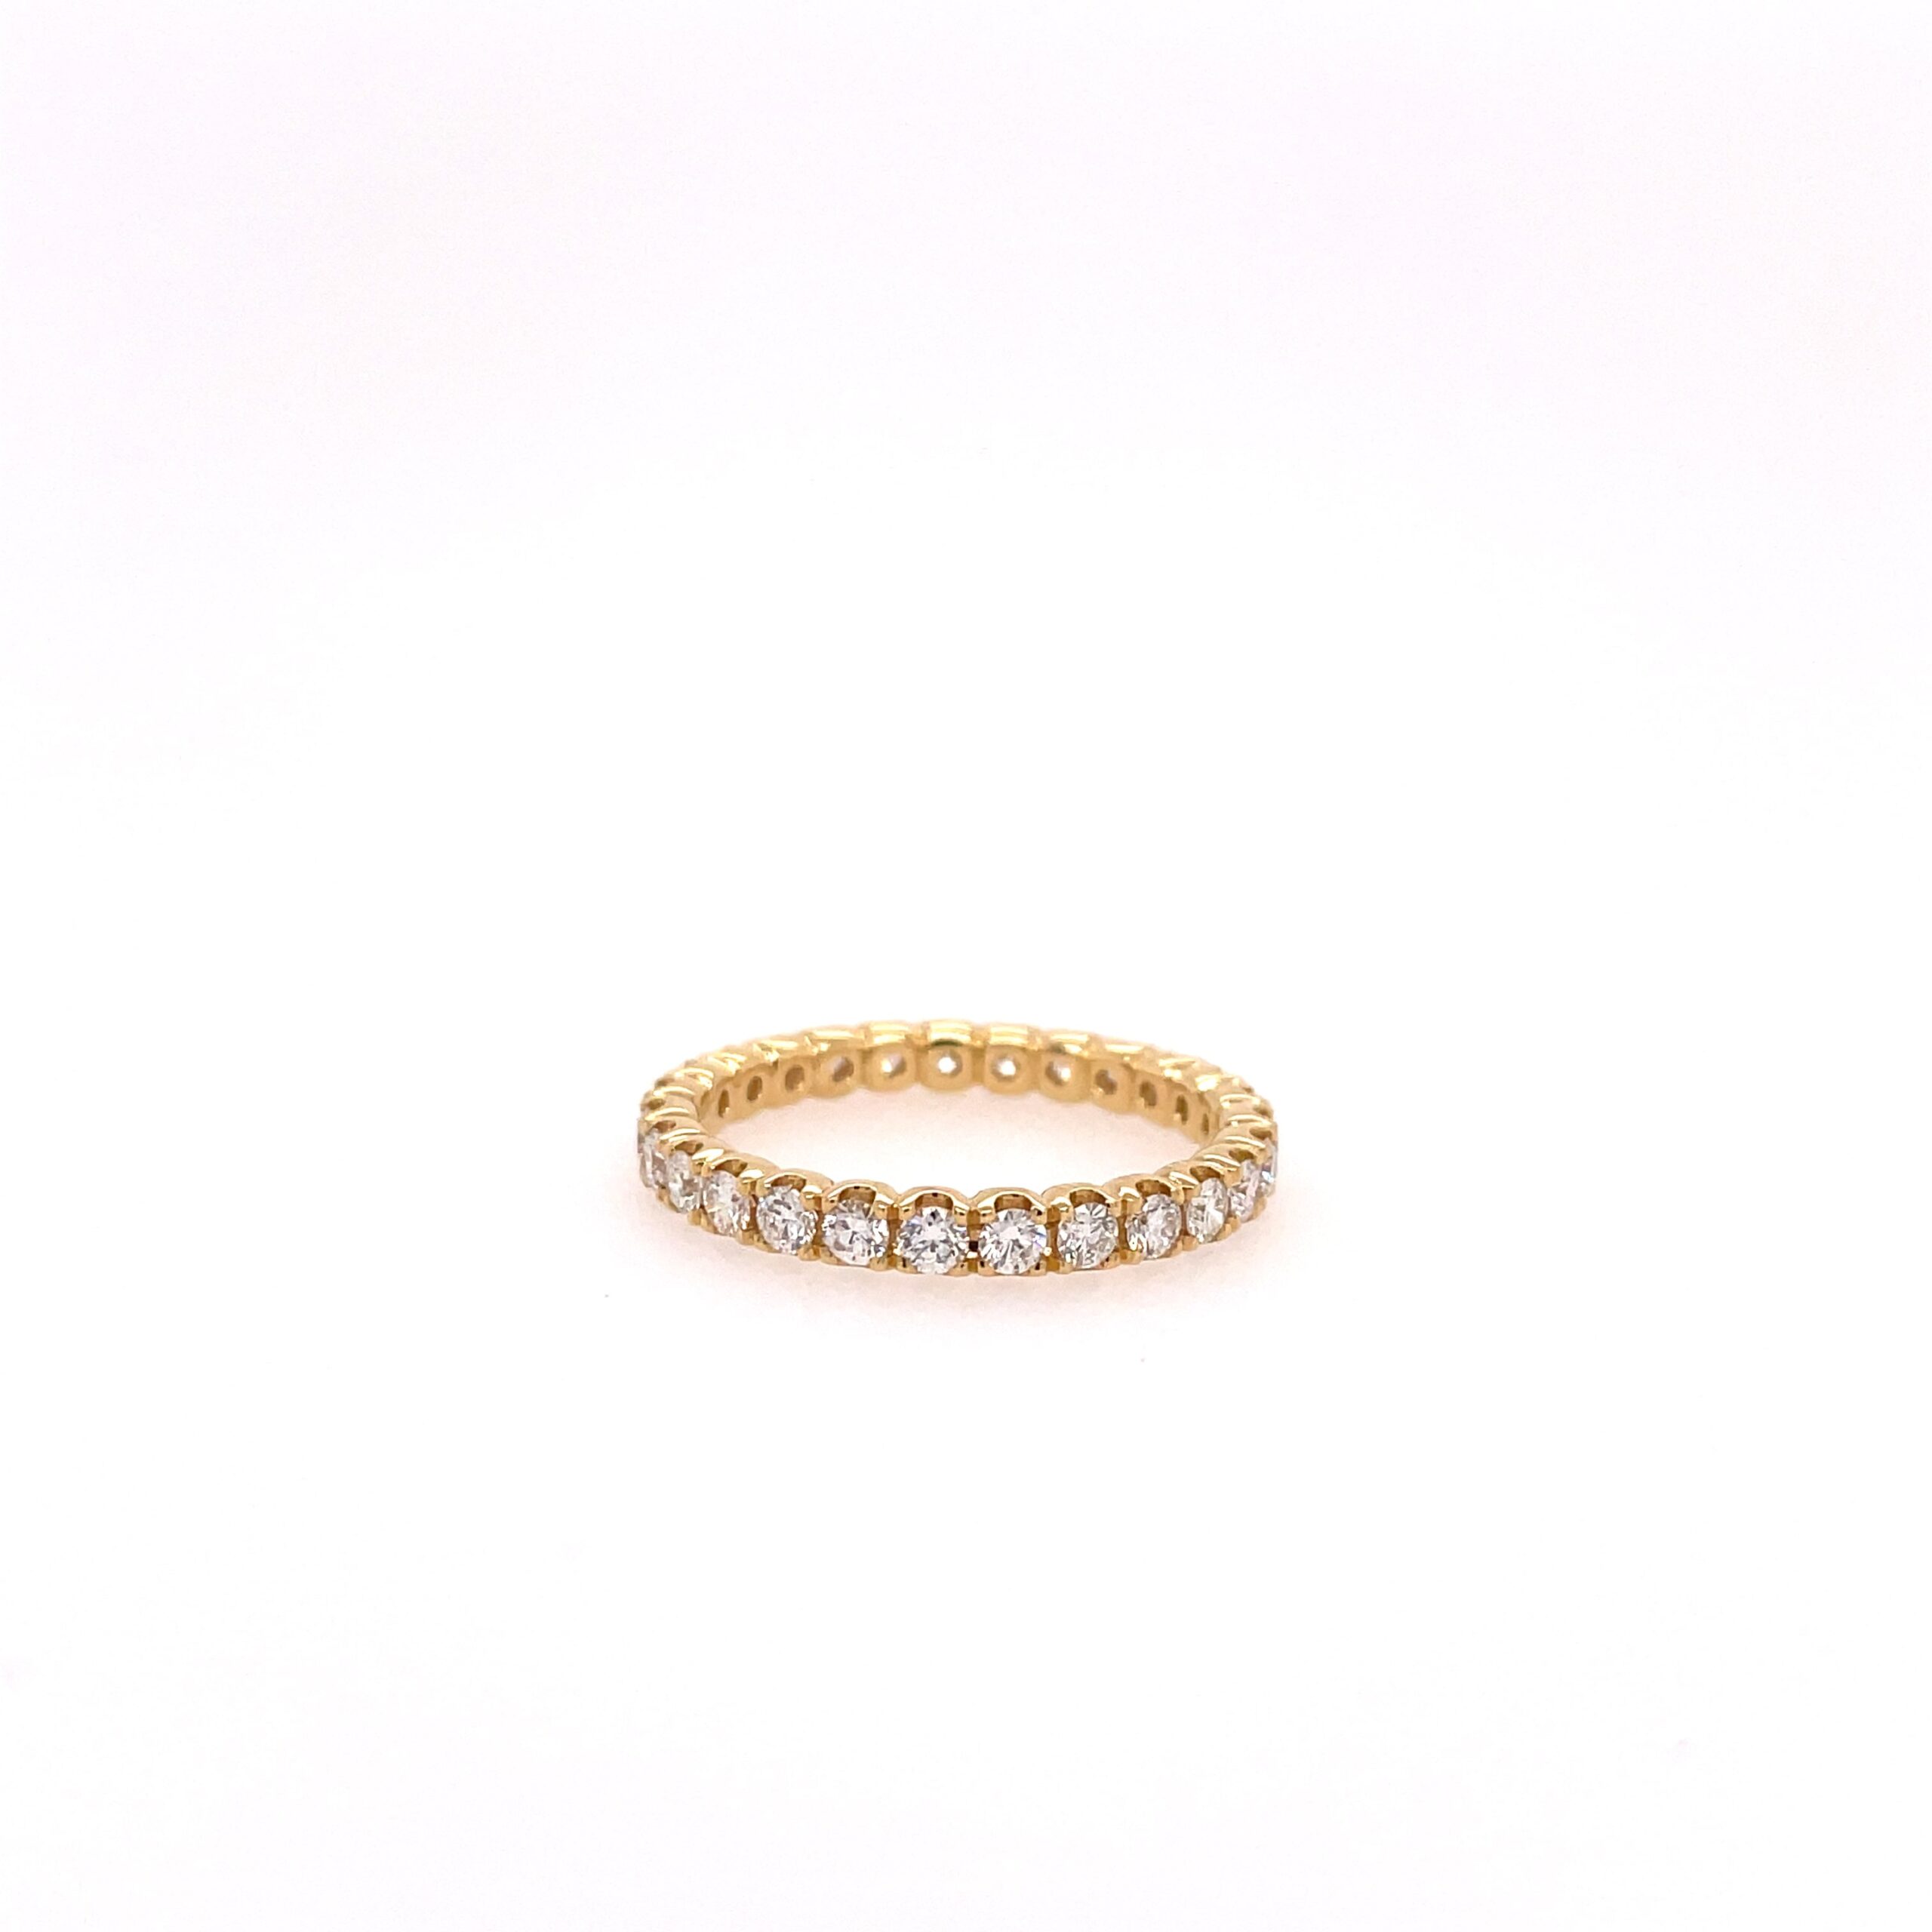 One yellow gold ring, the band filled with pave set round cut diamond, set againts on a white background and surfaced.